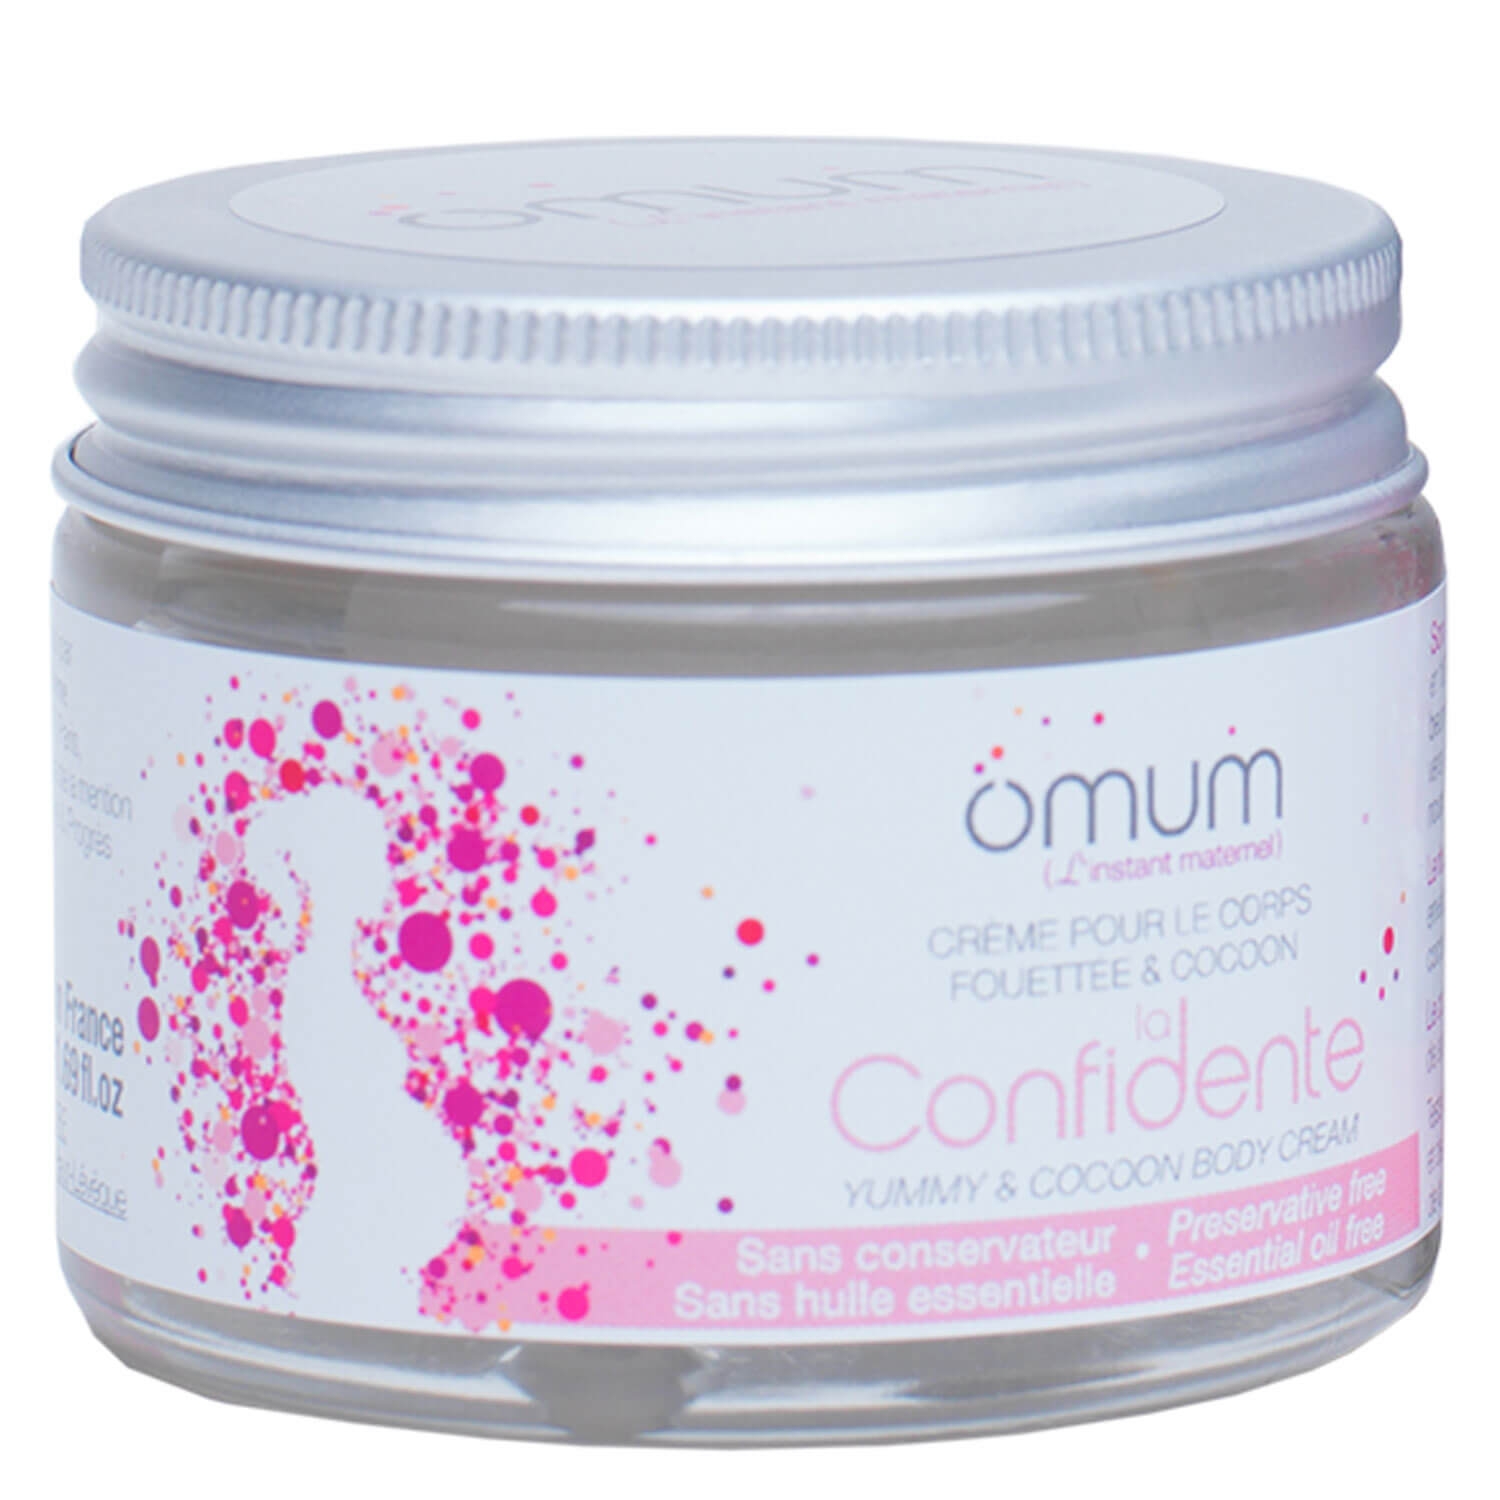 Product image from omum - La Confidente Yummy & Cocoon Body Cream